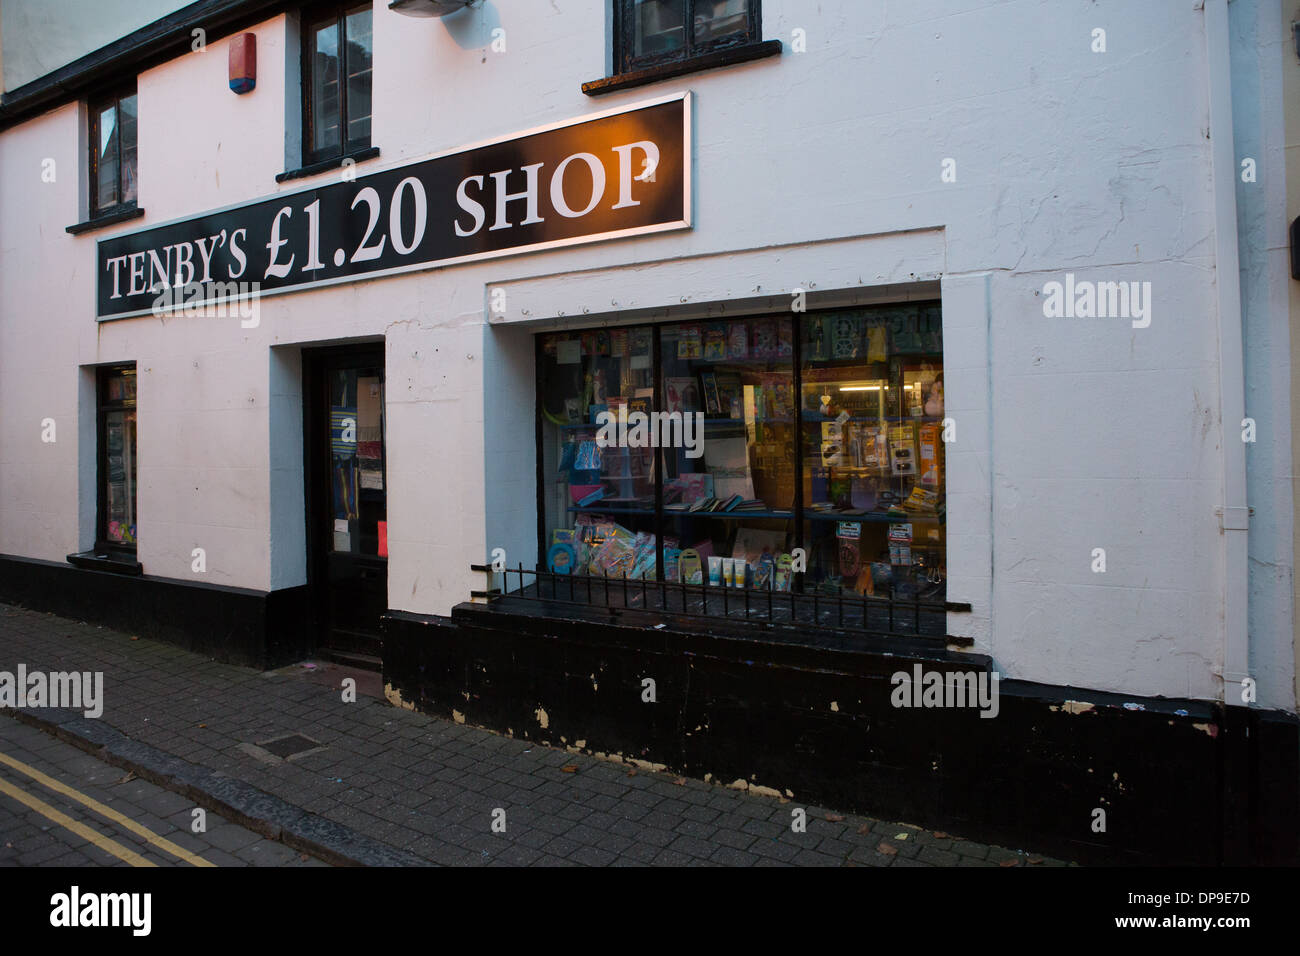 Discount shop in Tenby, Pembrokeshire, Wales Stock Photo